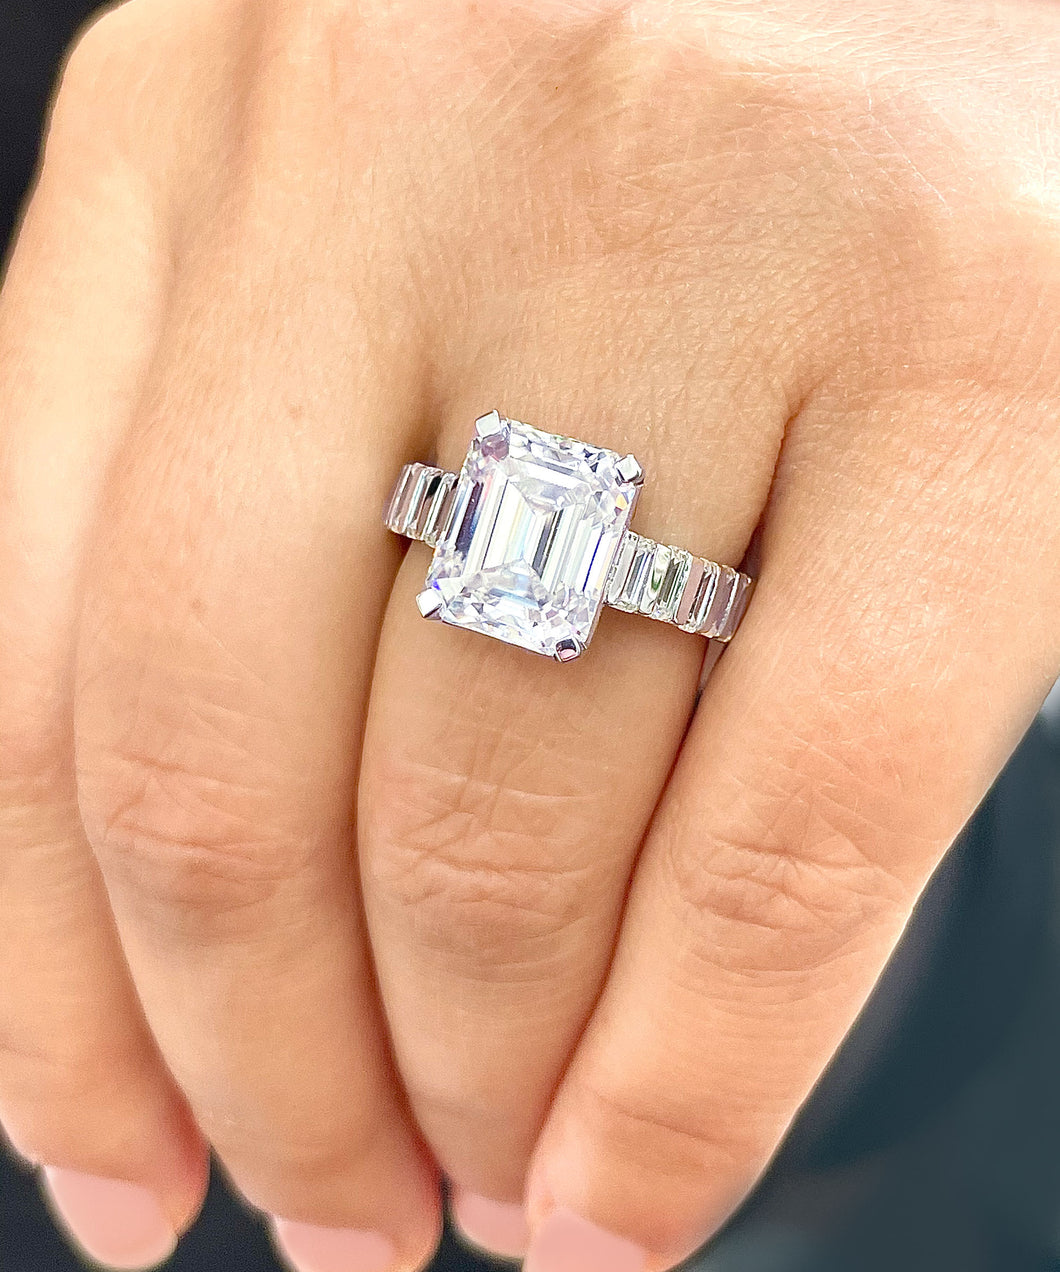 HUGE and heavy 14k solid white gold emerald cut moissanite engagement ring Bridal Wedding Propose 6.00ct Stunning!!